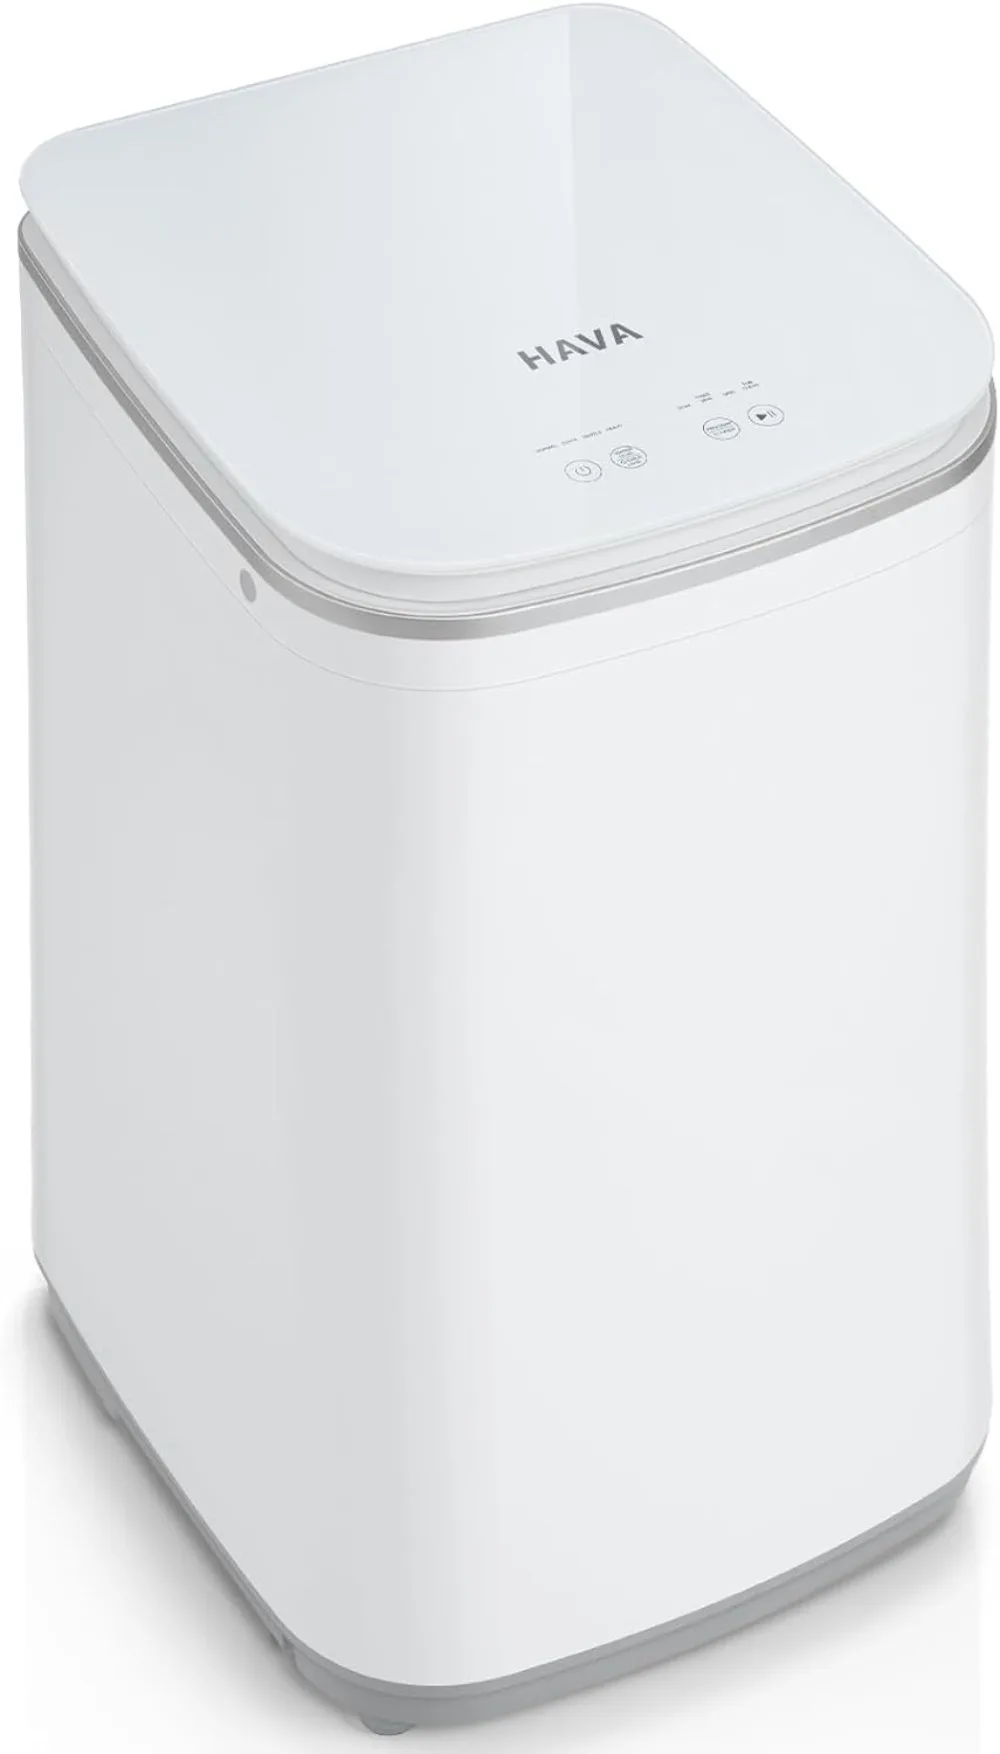 Portable Washer Fully Automatic Washing Machine Small Washer 0.8 Cu. Ft. - $465.59